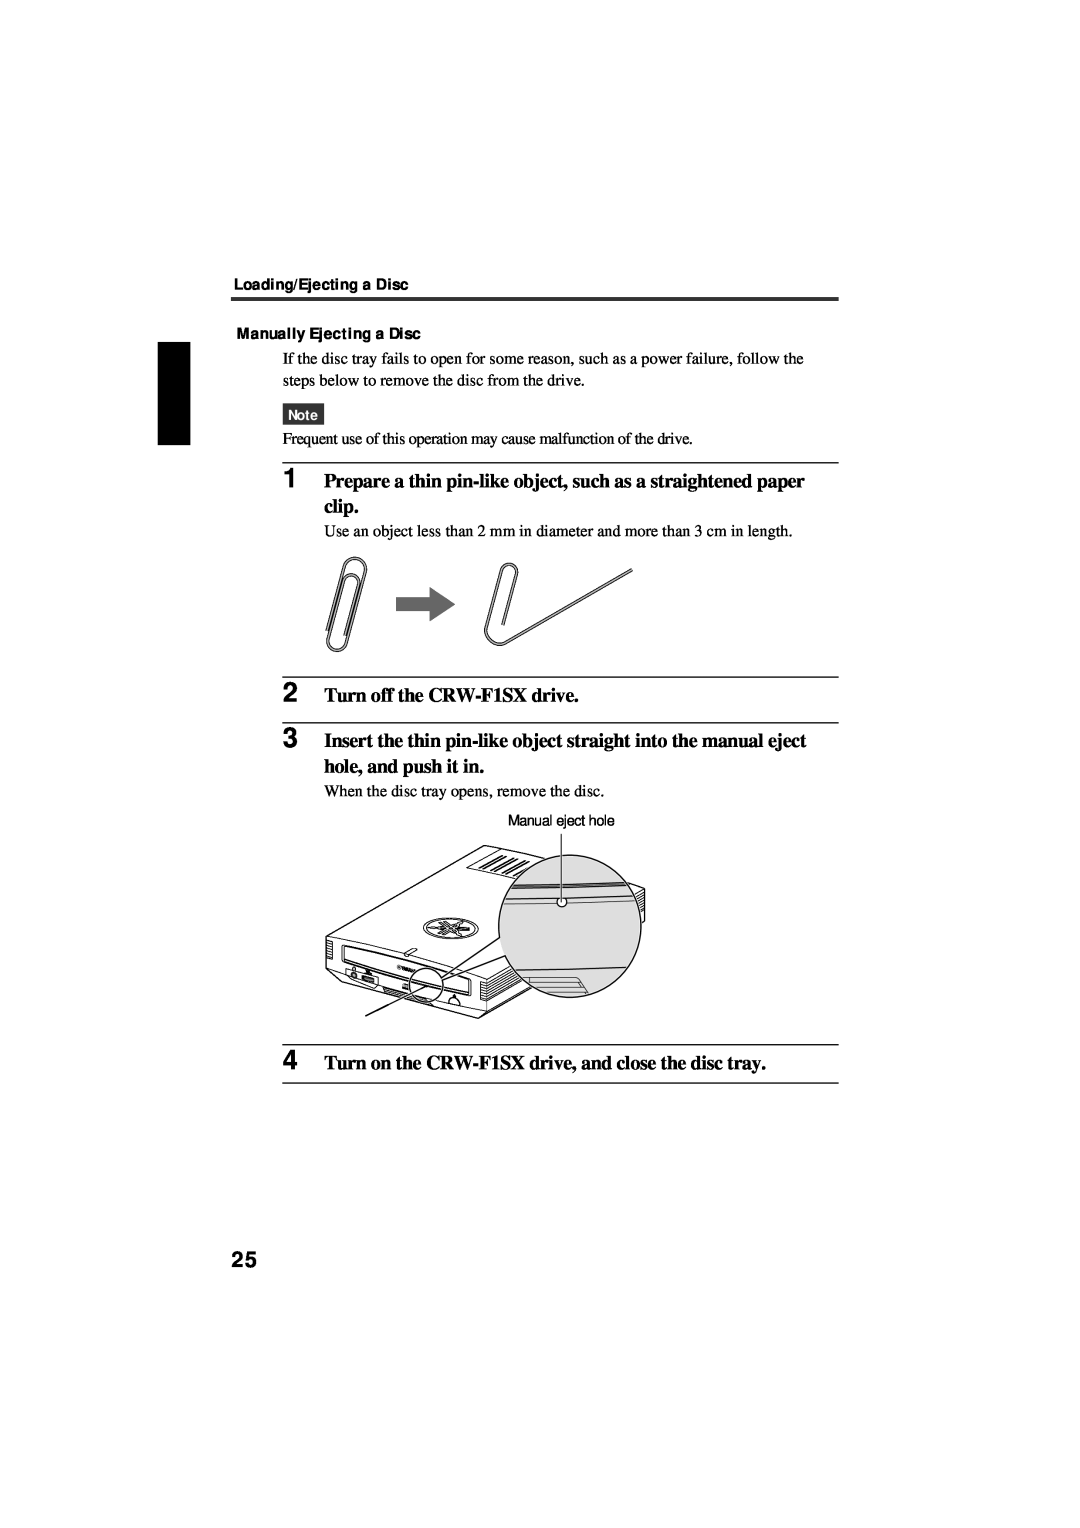 Yamaha CRW-F1SX manual Prepare a thin pin-like object, such as a straightened paper clip 